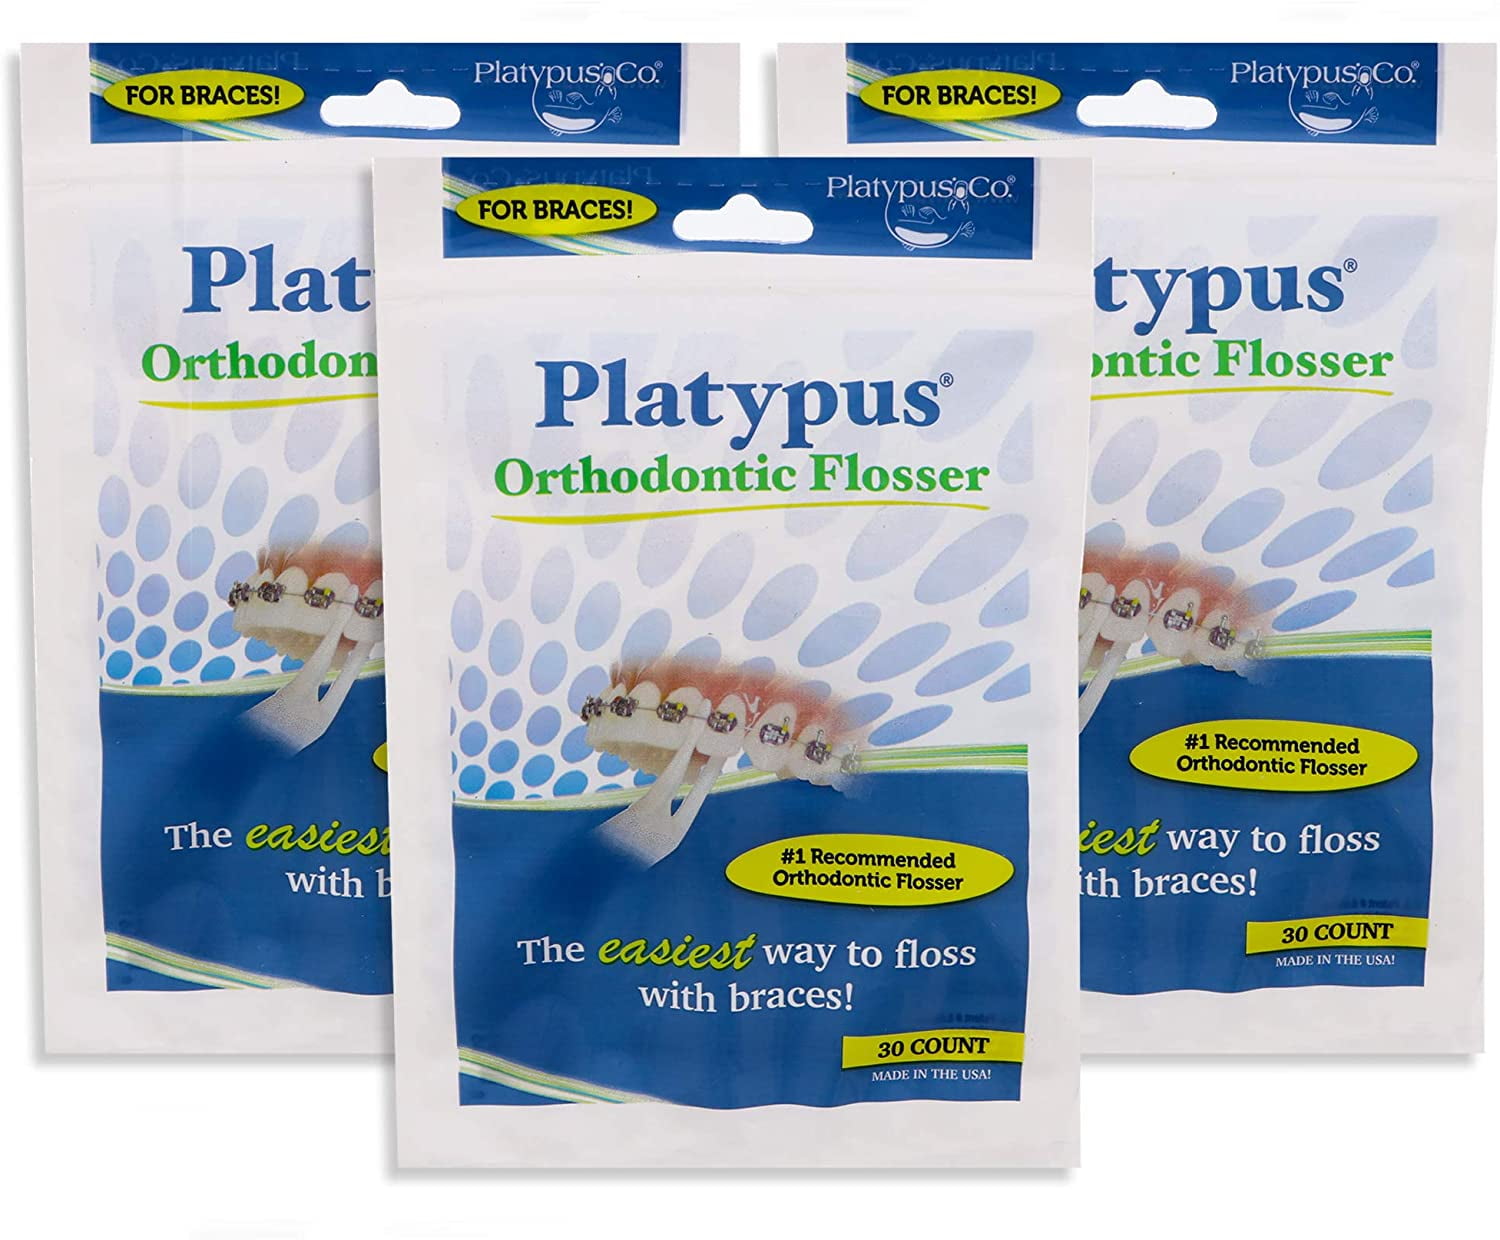 Platypus Flossers for Braces, Floss Picks for Braces Fits Under Arch Wire, Will Not Damage Braces, Increase Flossing Compliance, Floss Teeth in Two Minutes, 30 Count (Pack 3) - Walmart.com